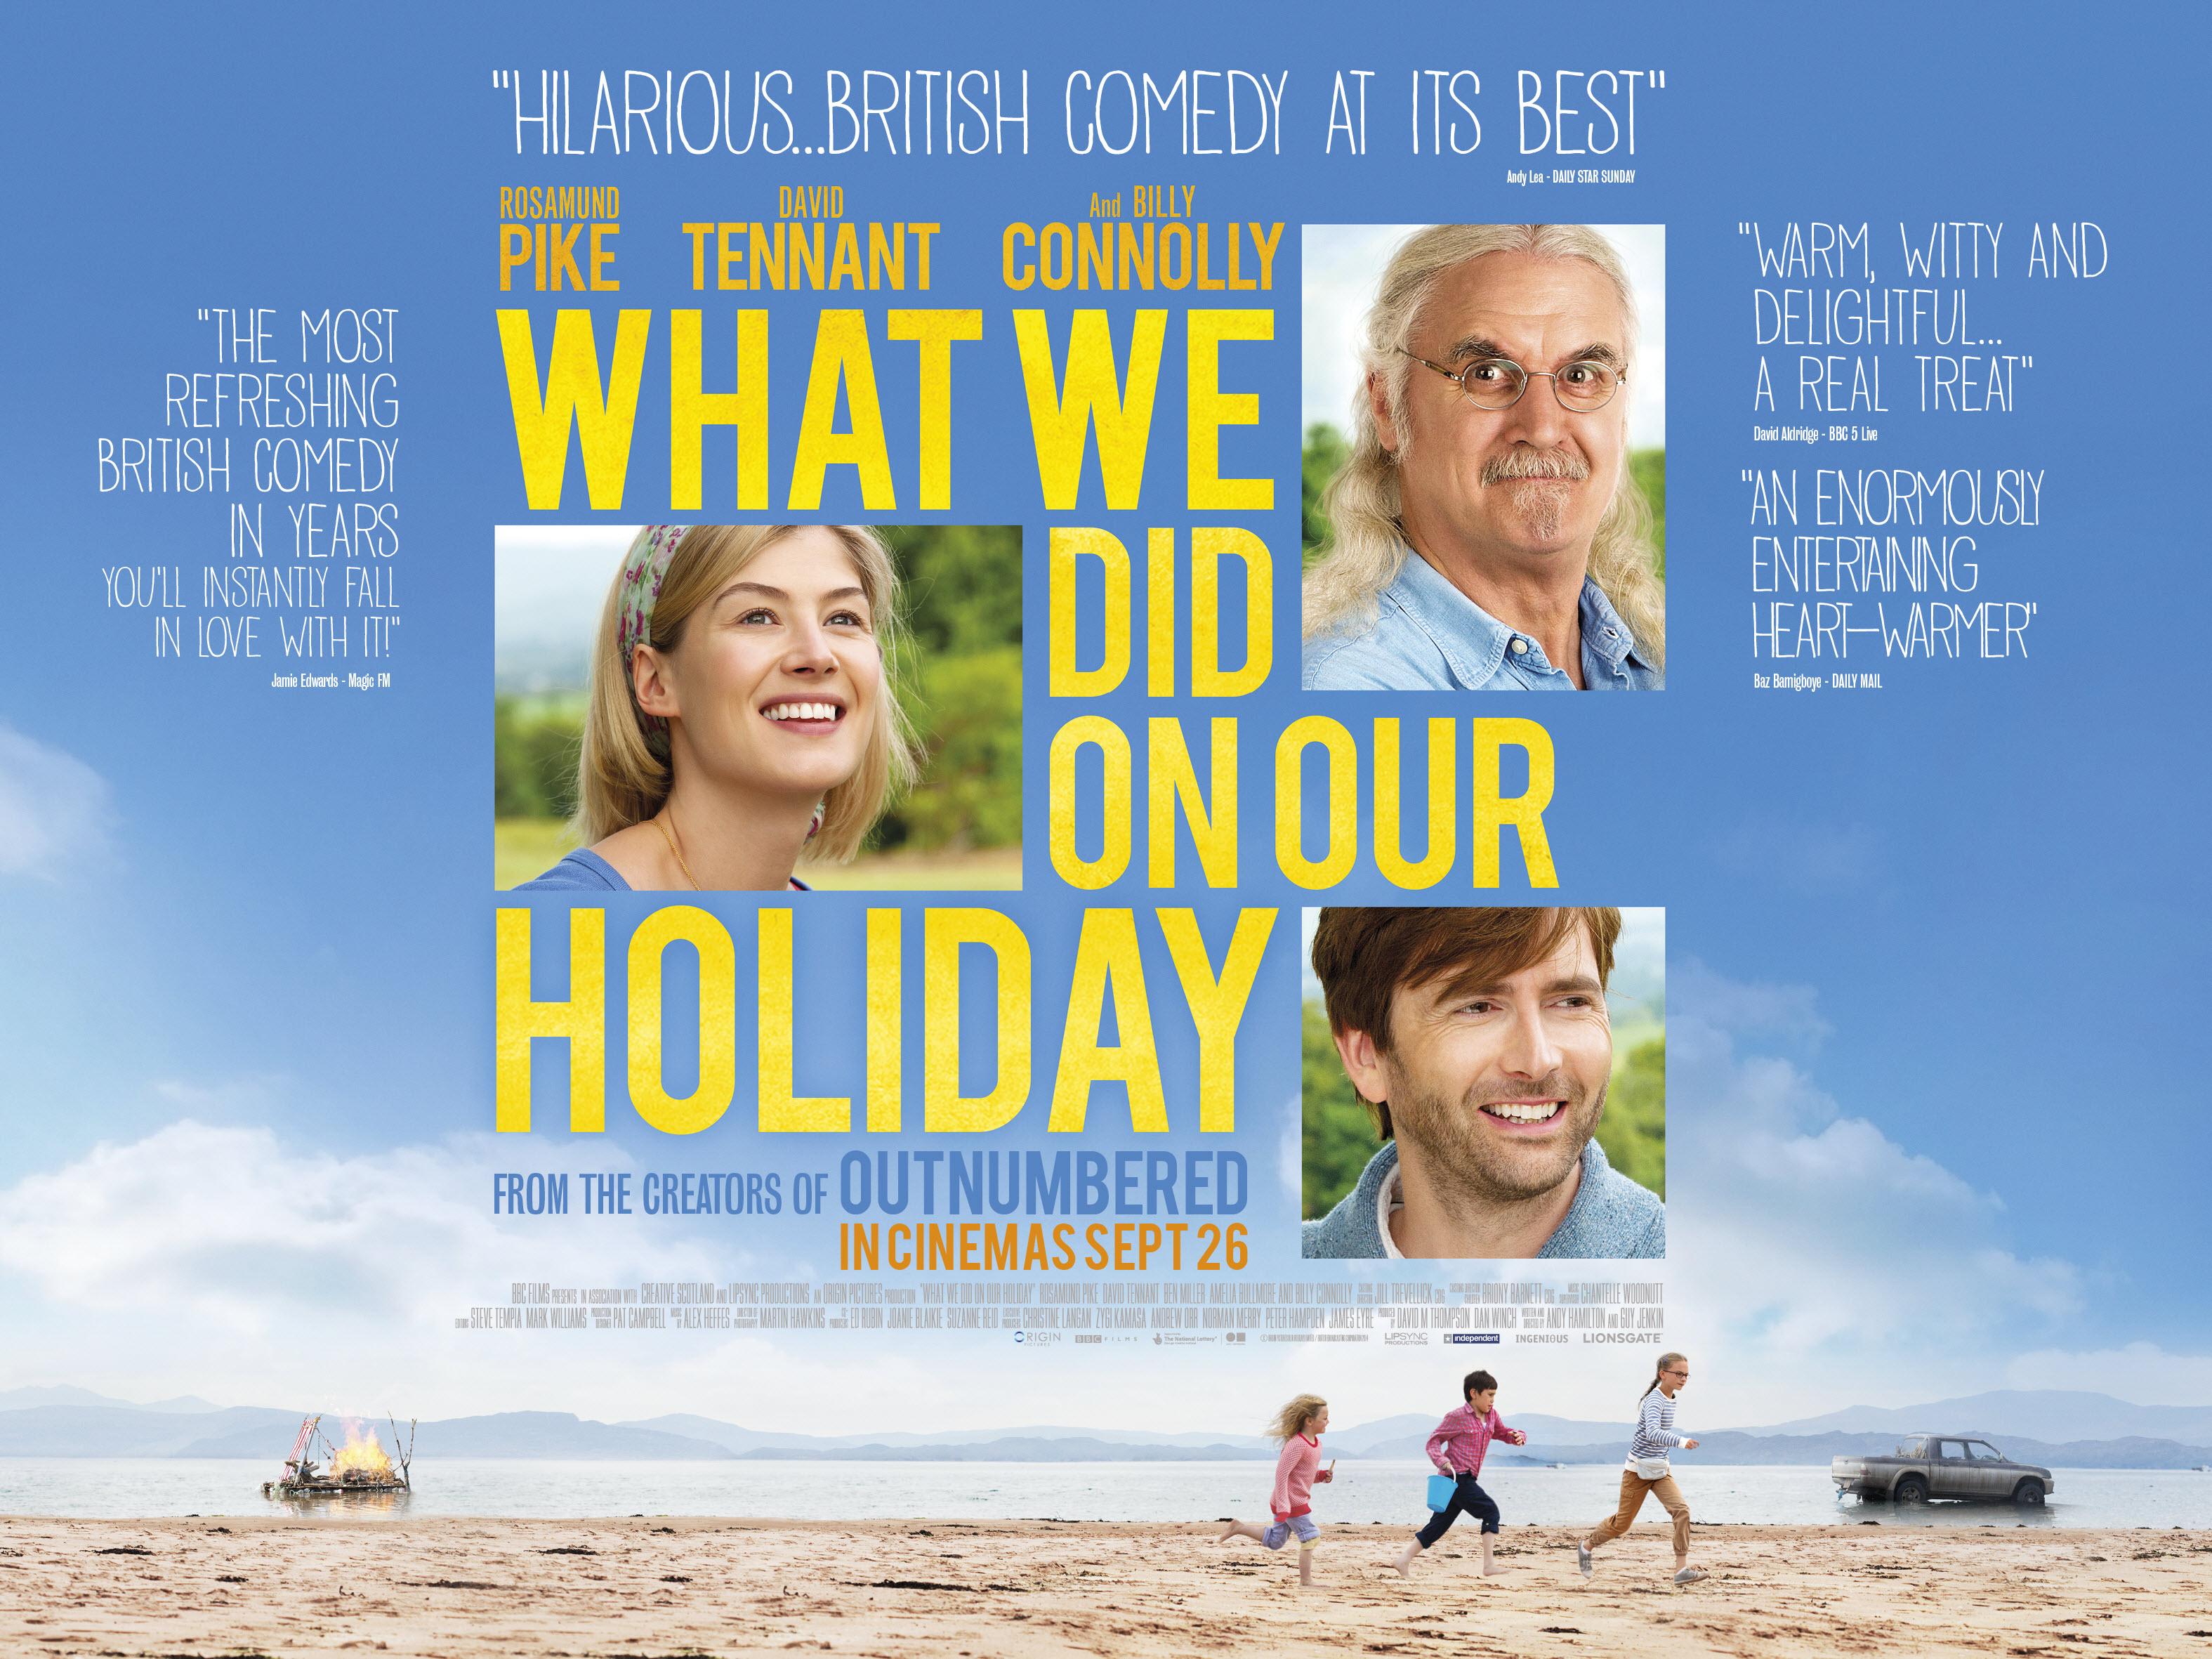 The Last Holiday Movie Quotes. QuotesGram